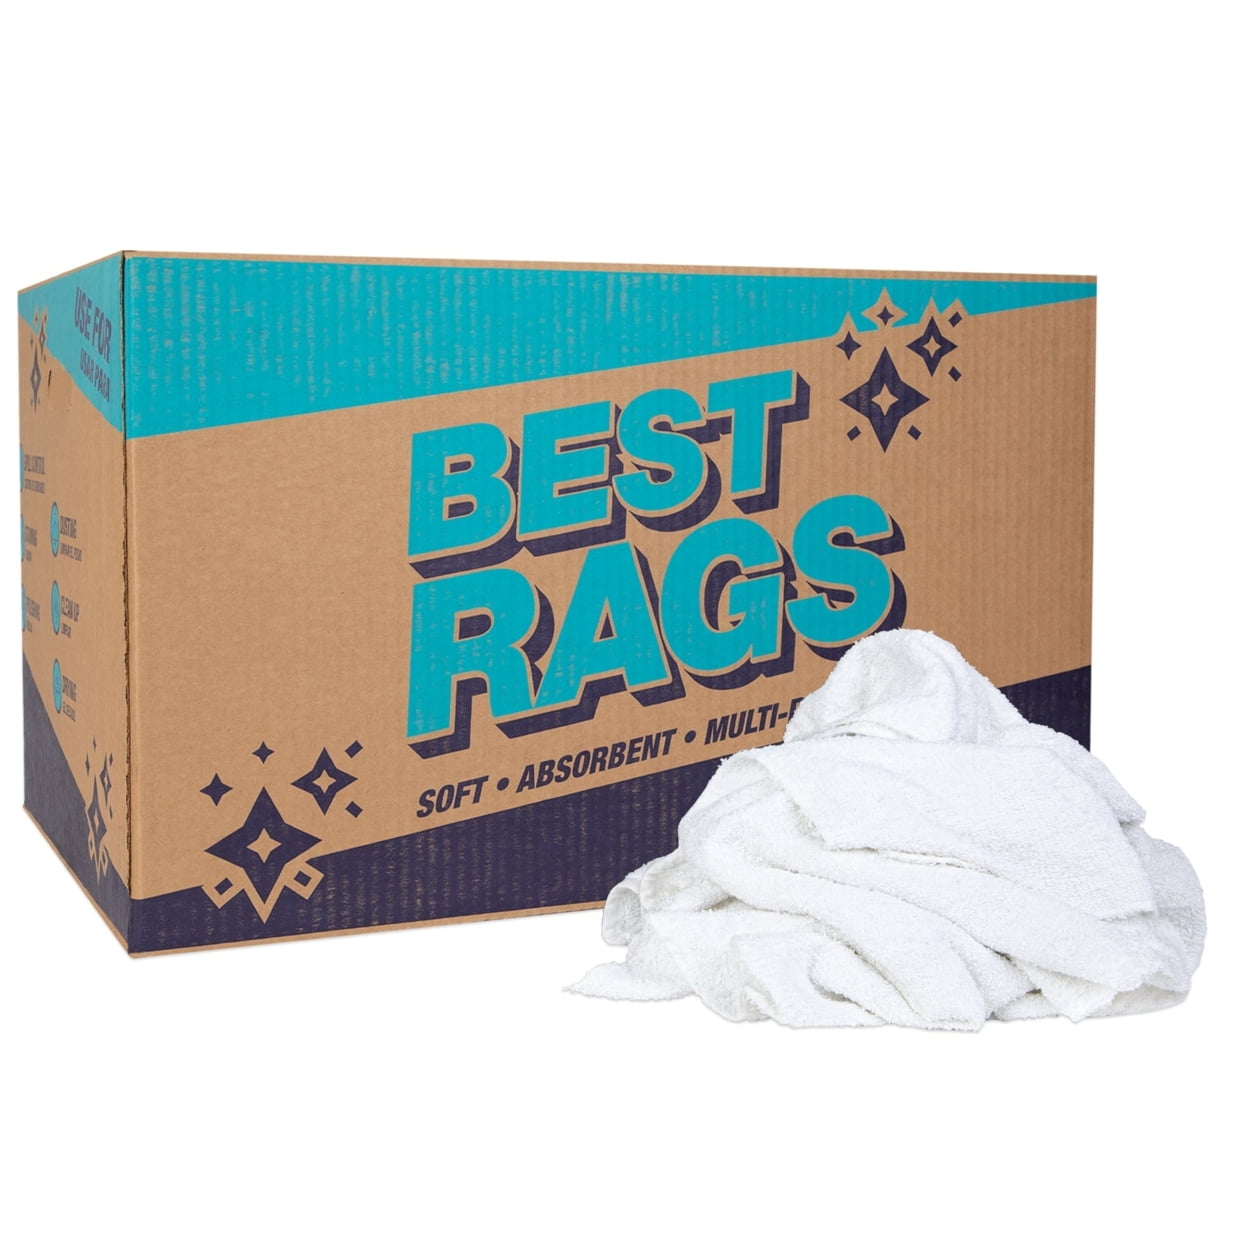 Burdisco White Terry Cloth Cleaning/Shop Rags - Plumbers Rags- 25 Lb. Box  100% Cotton